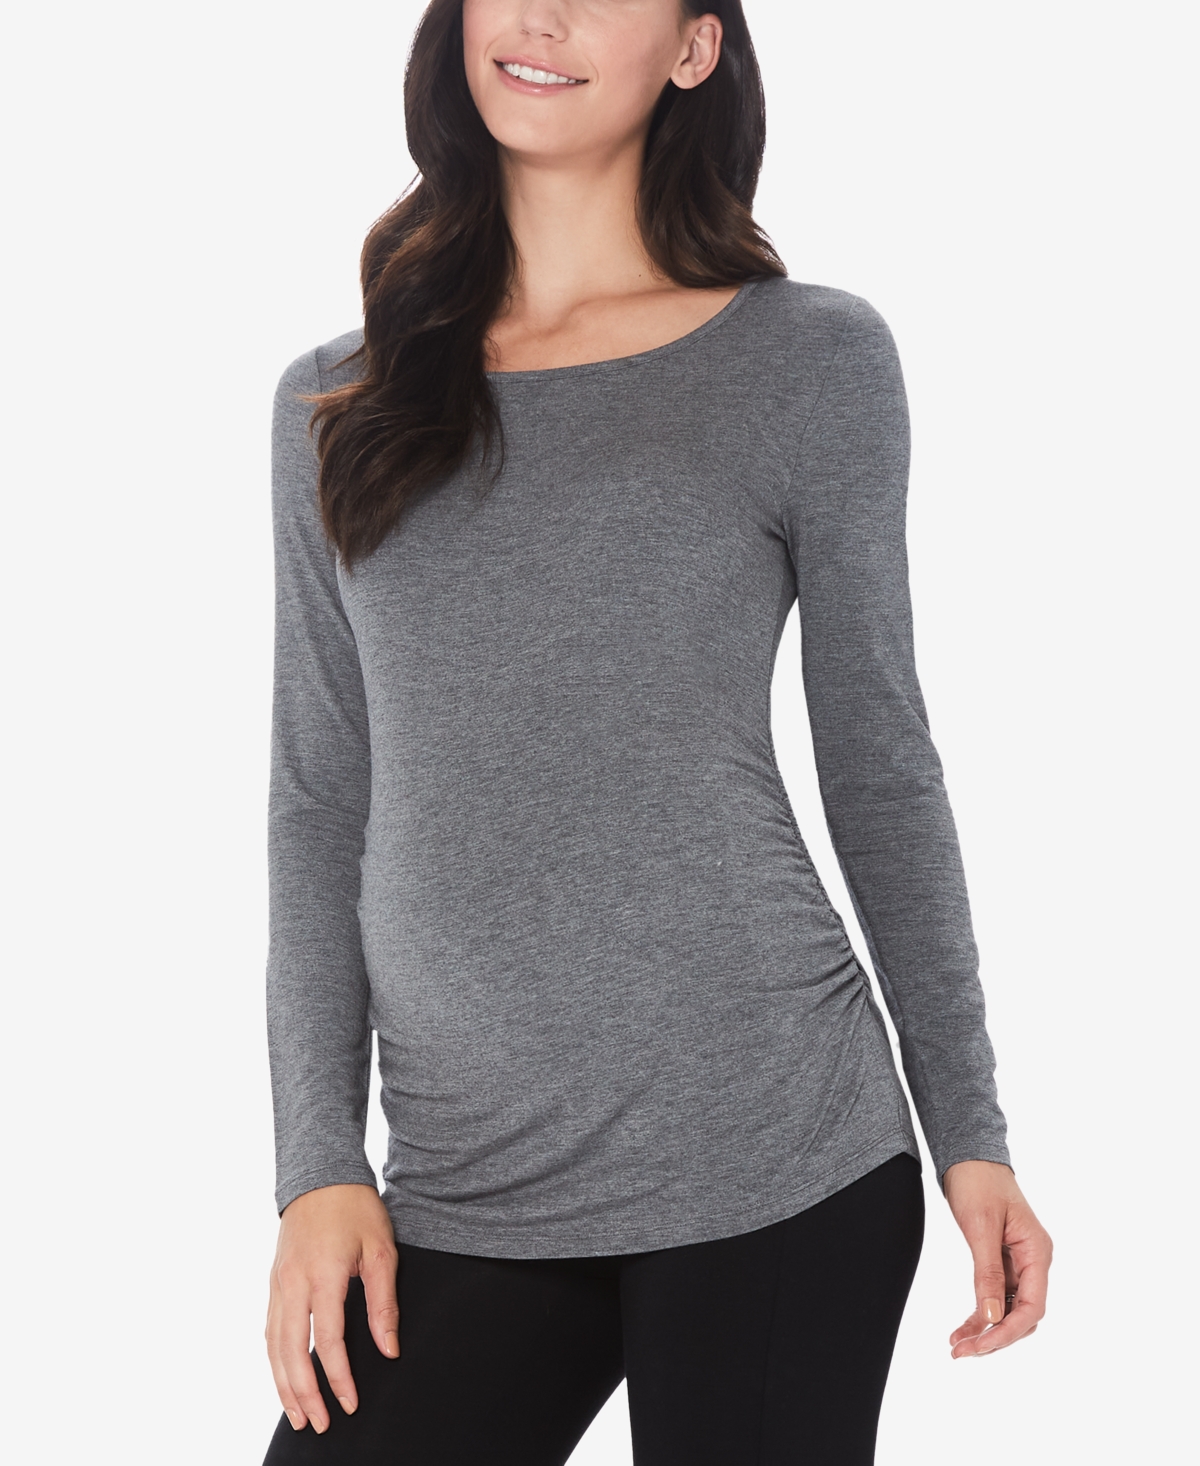 Women's Softwear with Stretch Maternity Long Sleeve Ballet Neck Top - Black